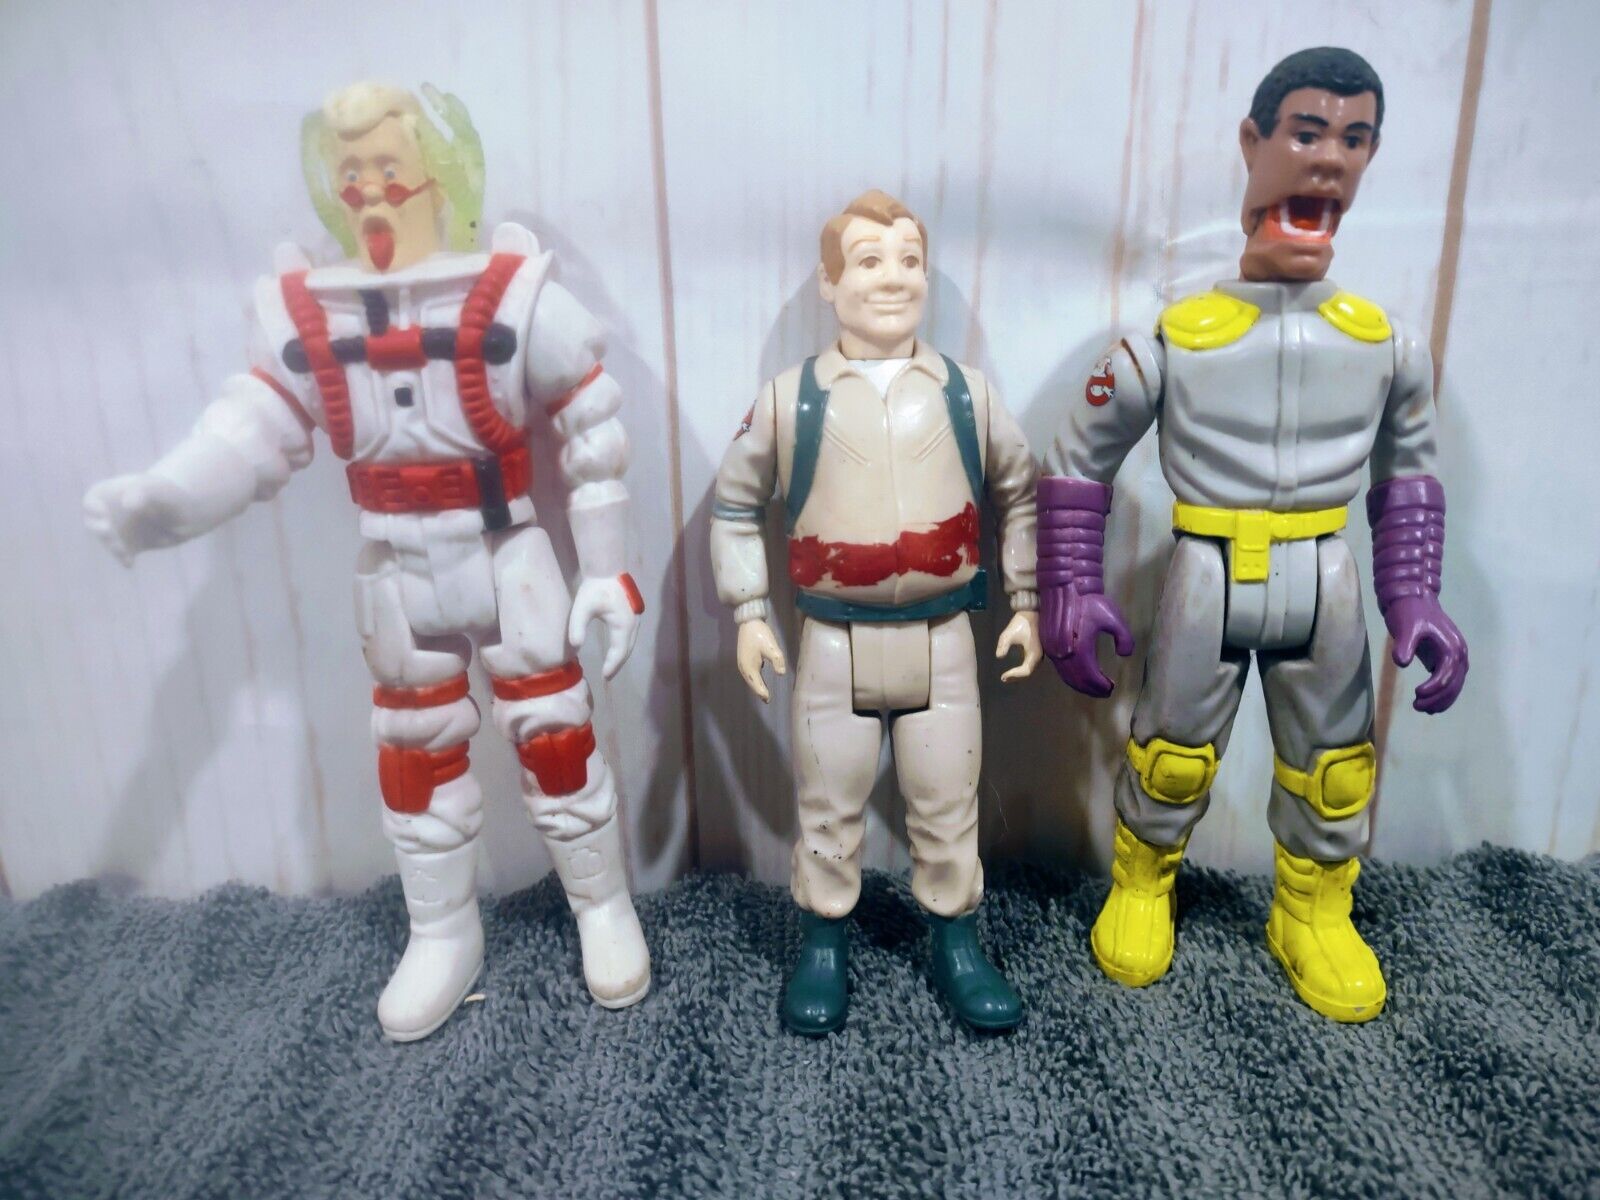 1987 Ghostbusters Movie Figures Lot 3 Vintage Toy Columbia Kenner Fast Ship 👻👻